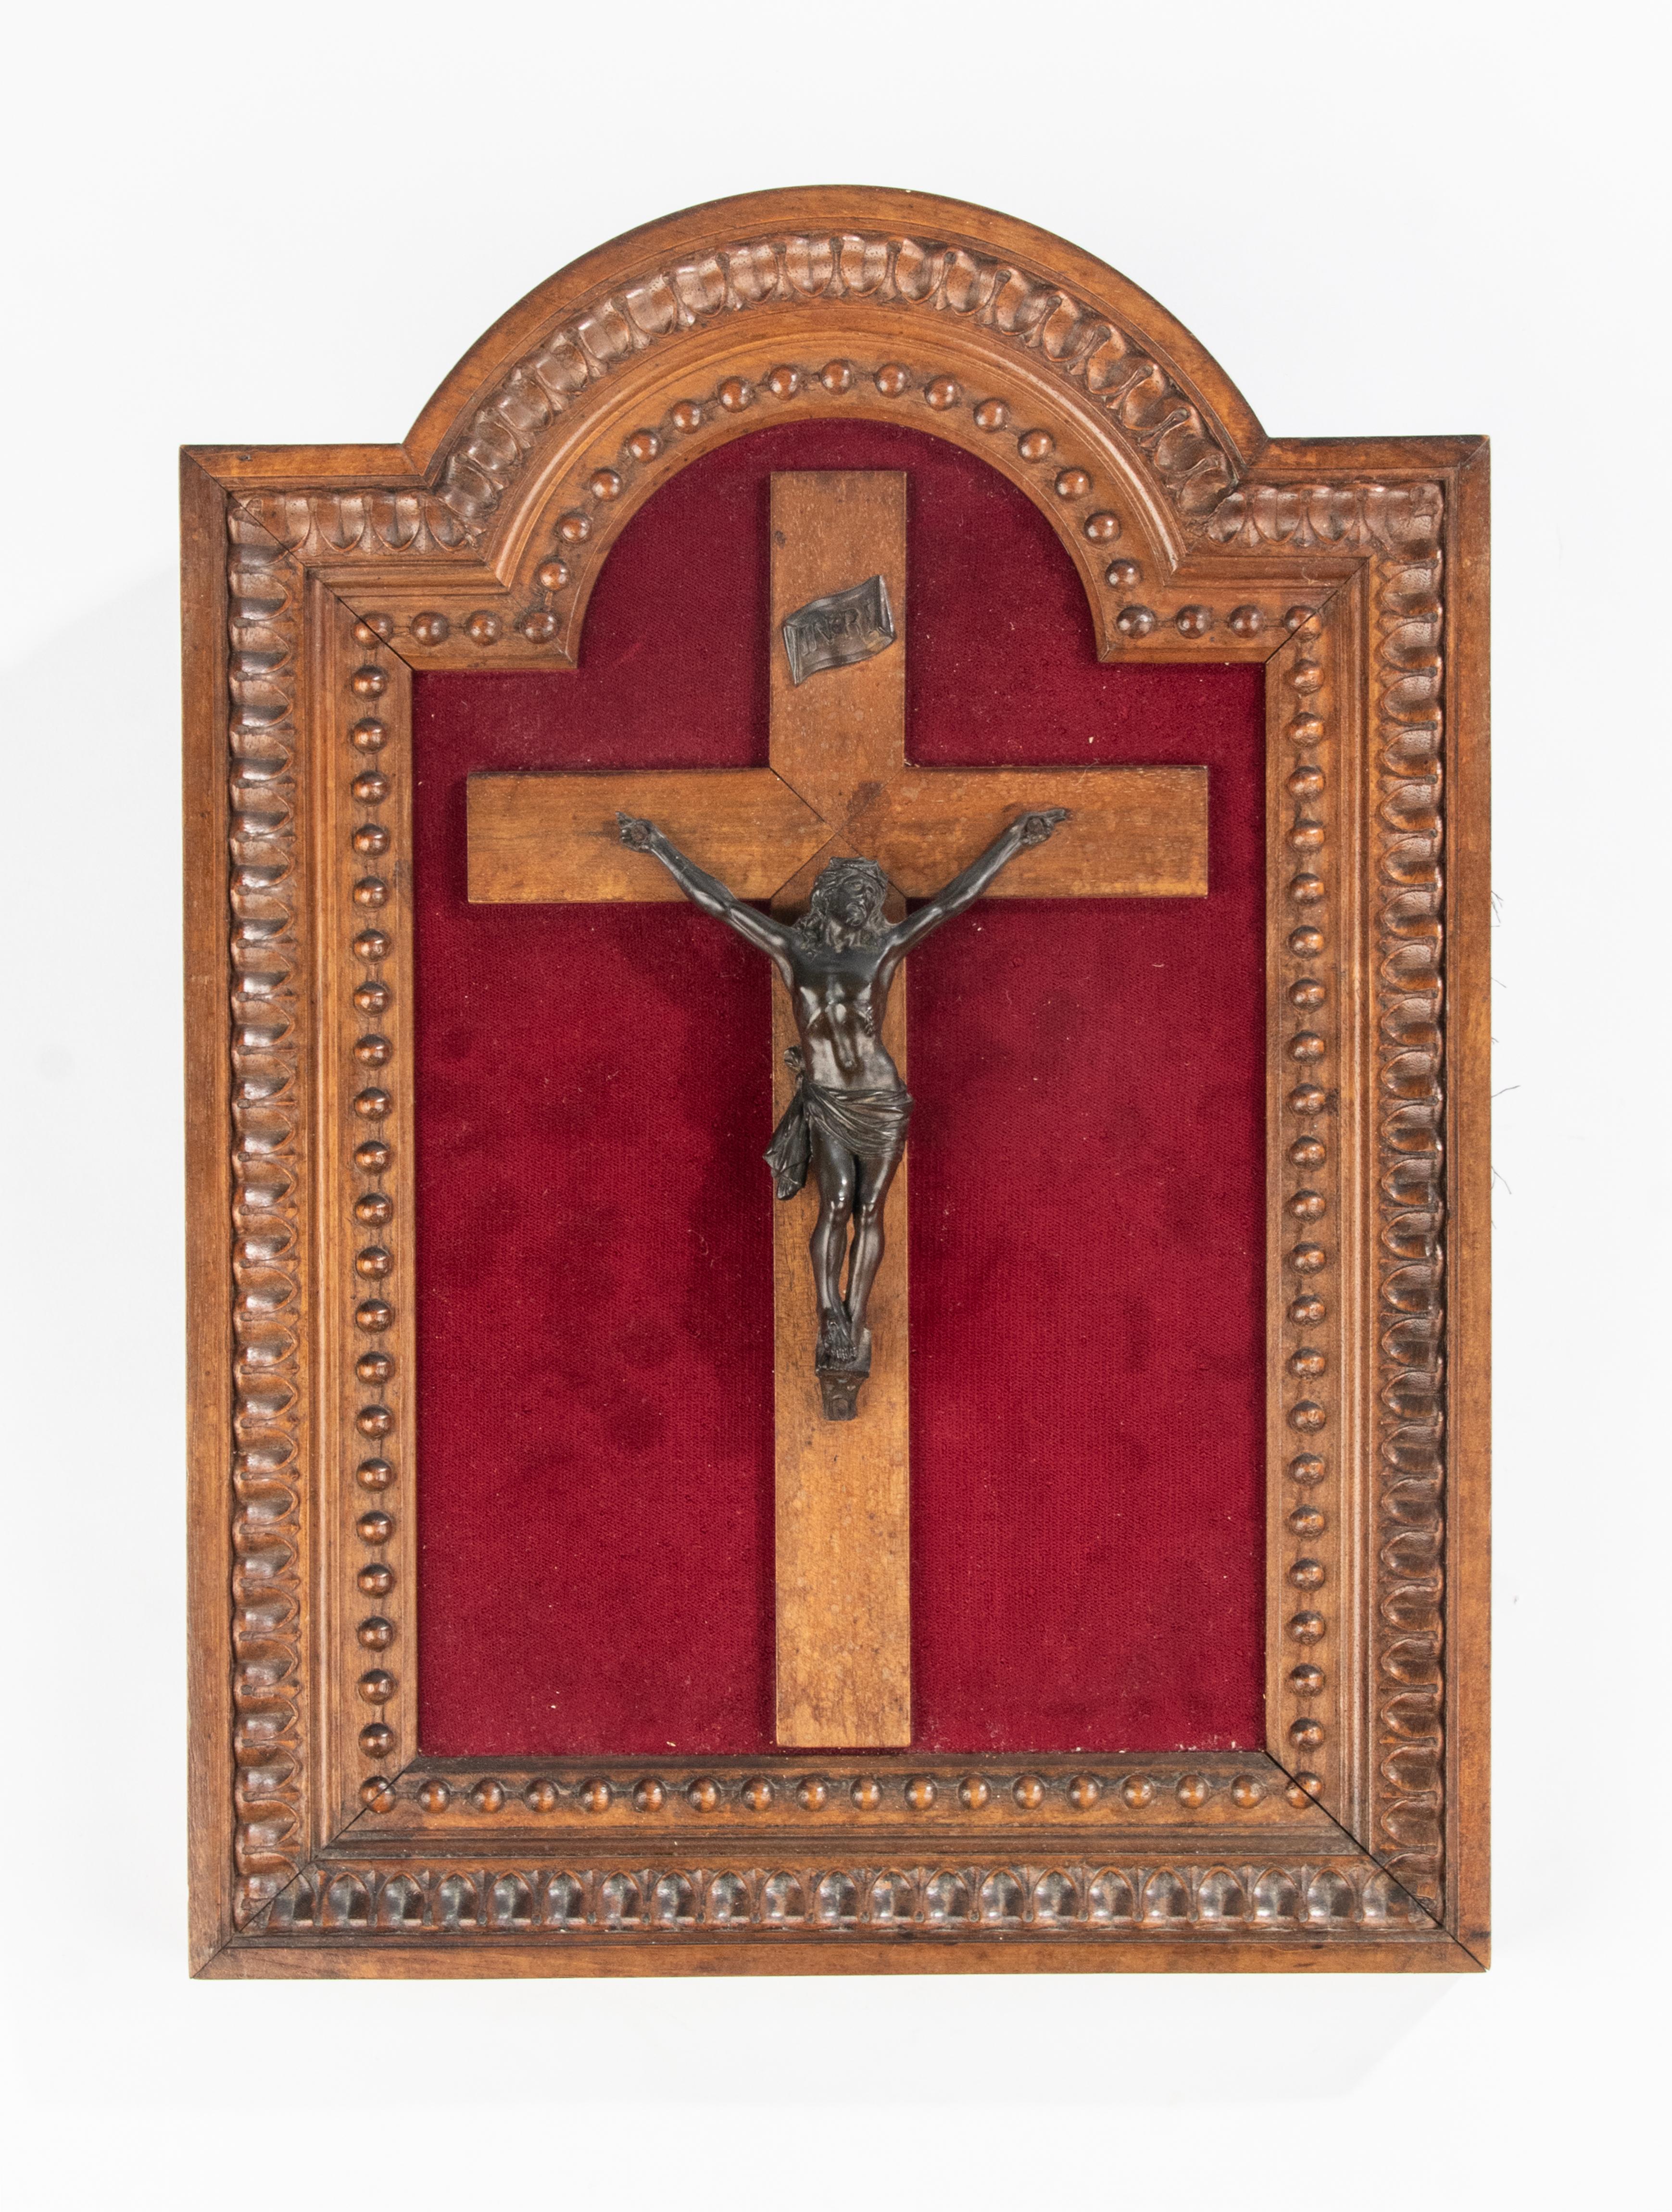 Gothic Revival Late 19th Century Bronze Crucifix Corpus Christi in Carved Walnut Frame  For Sale